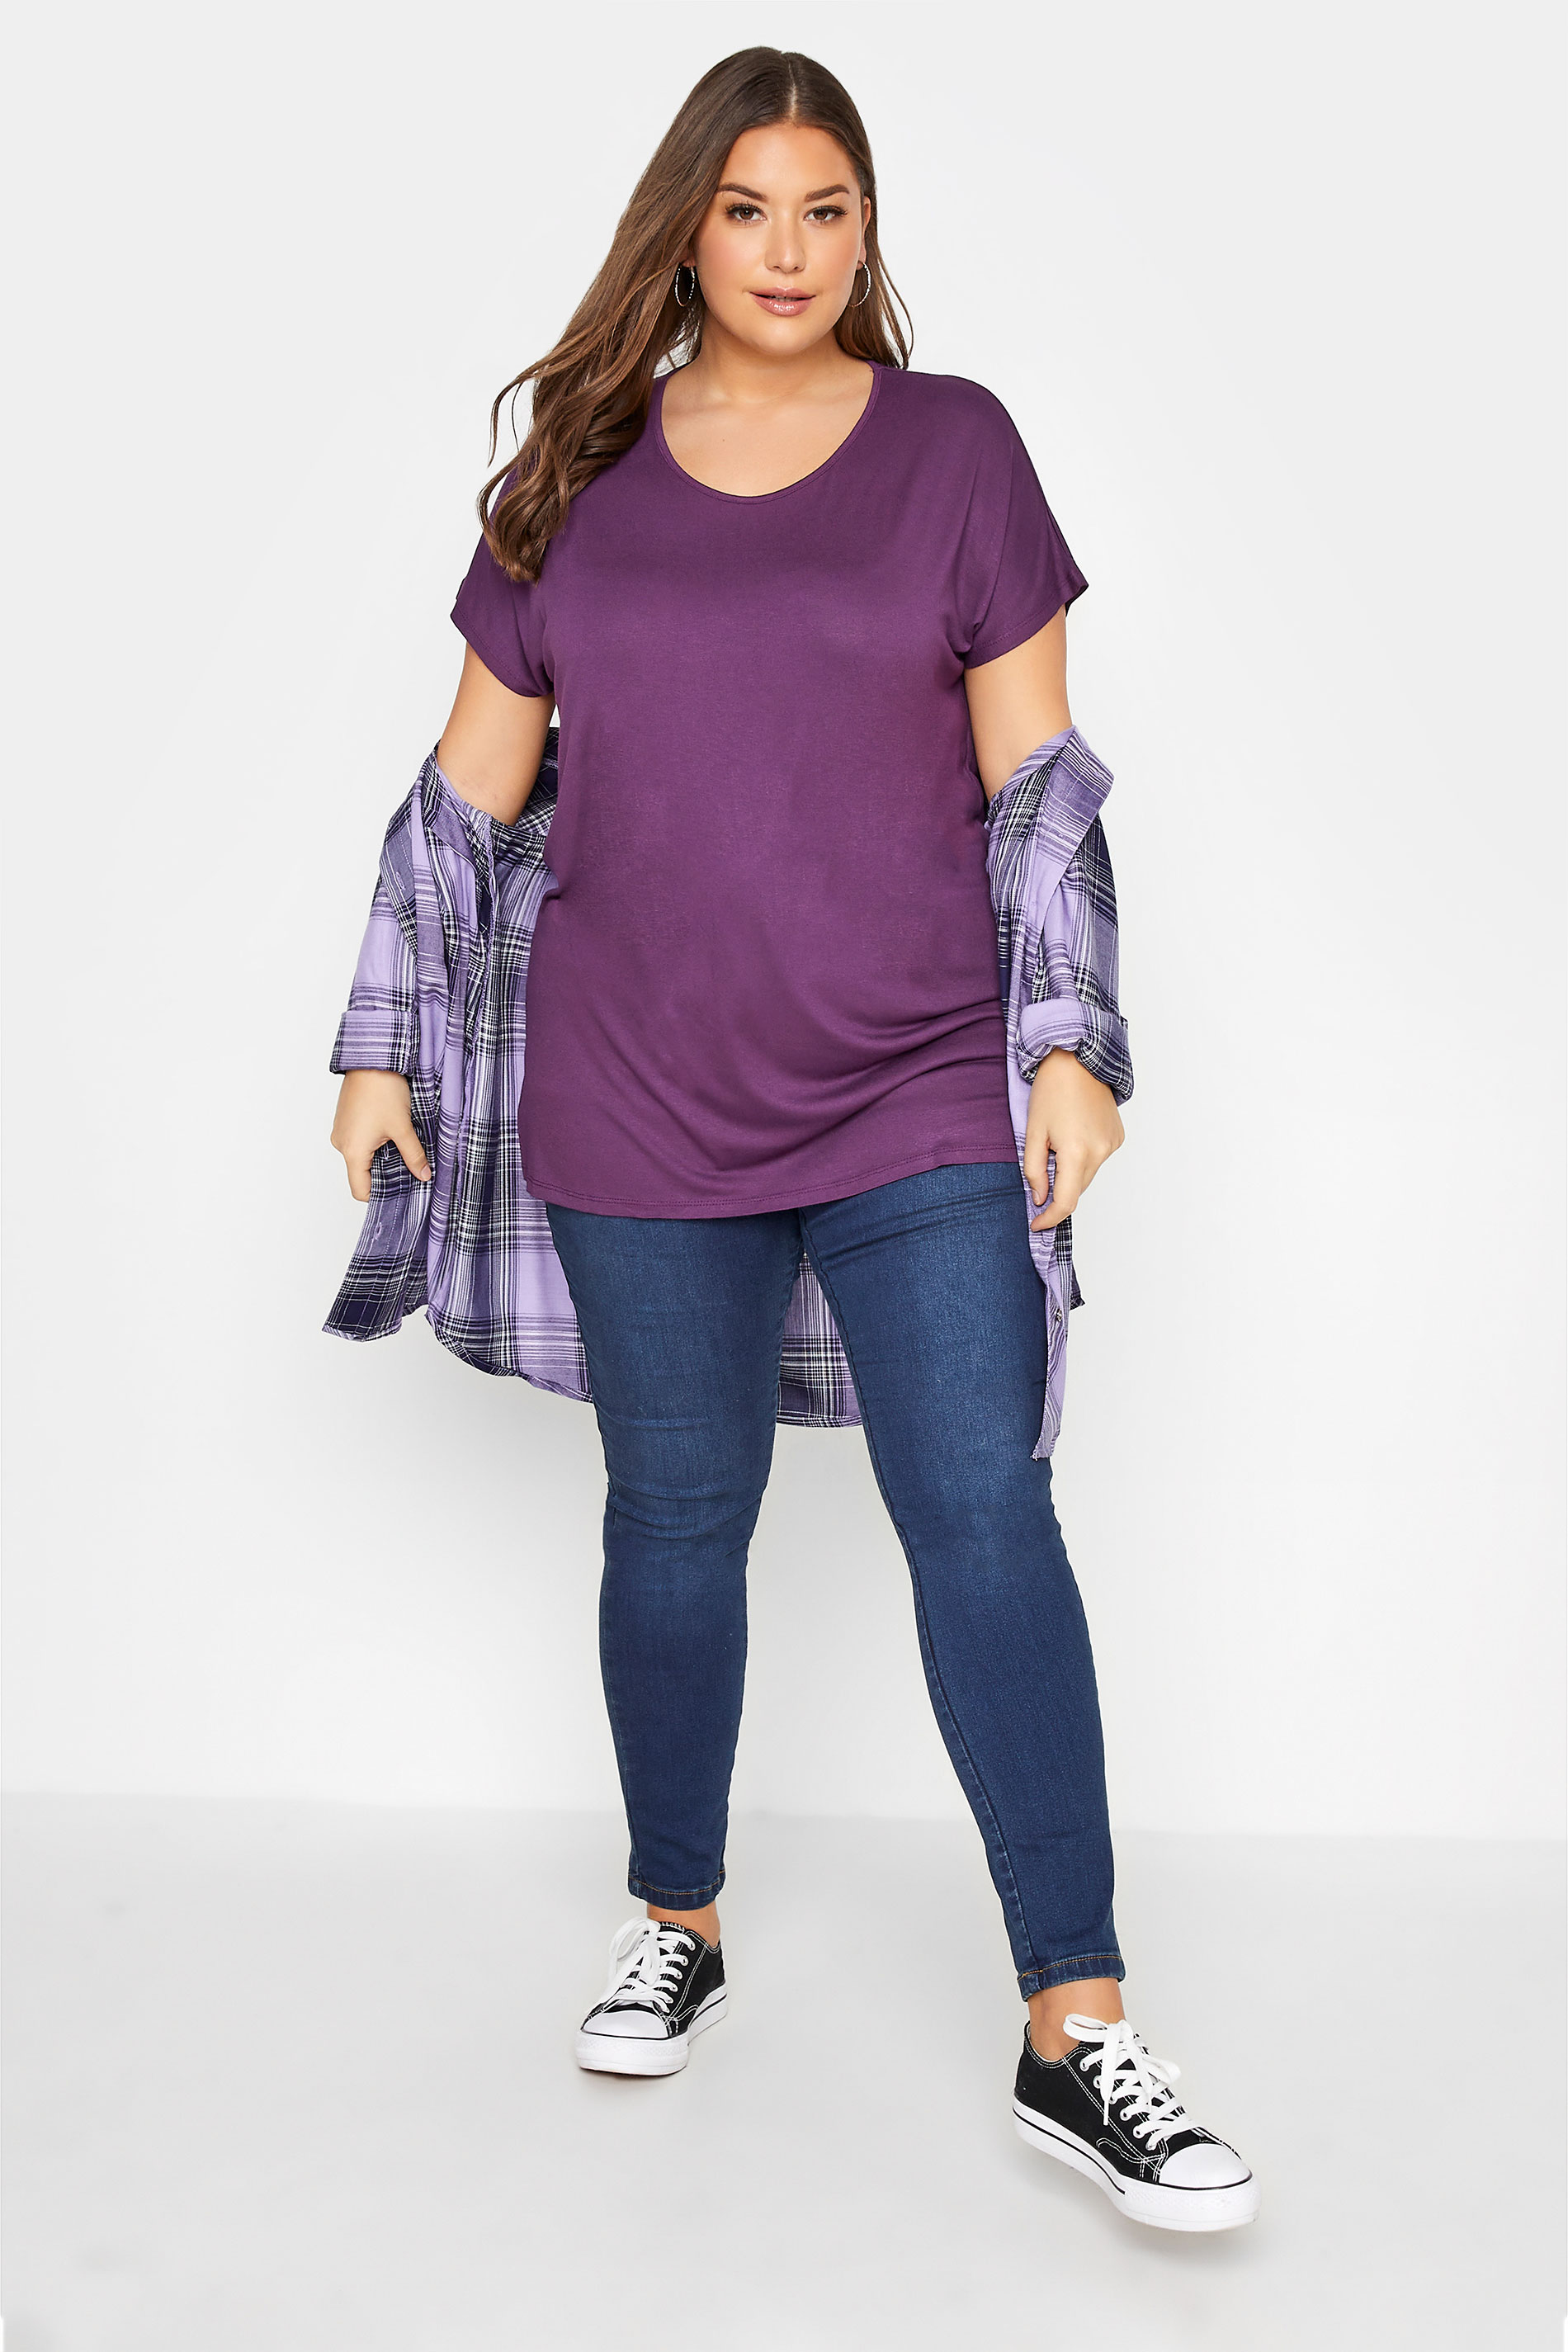 Grande taille  Tops Grande taille  T-Shirts | T-Shirt Violet Ourlet Plongeant - ZD53243